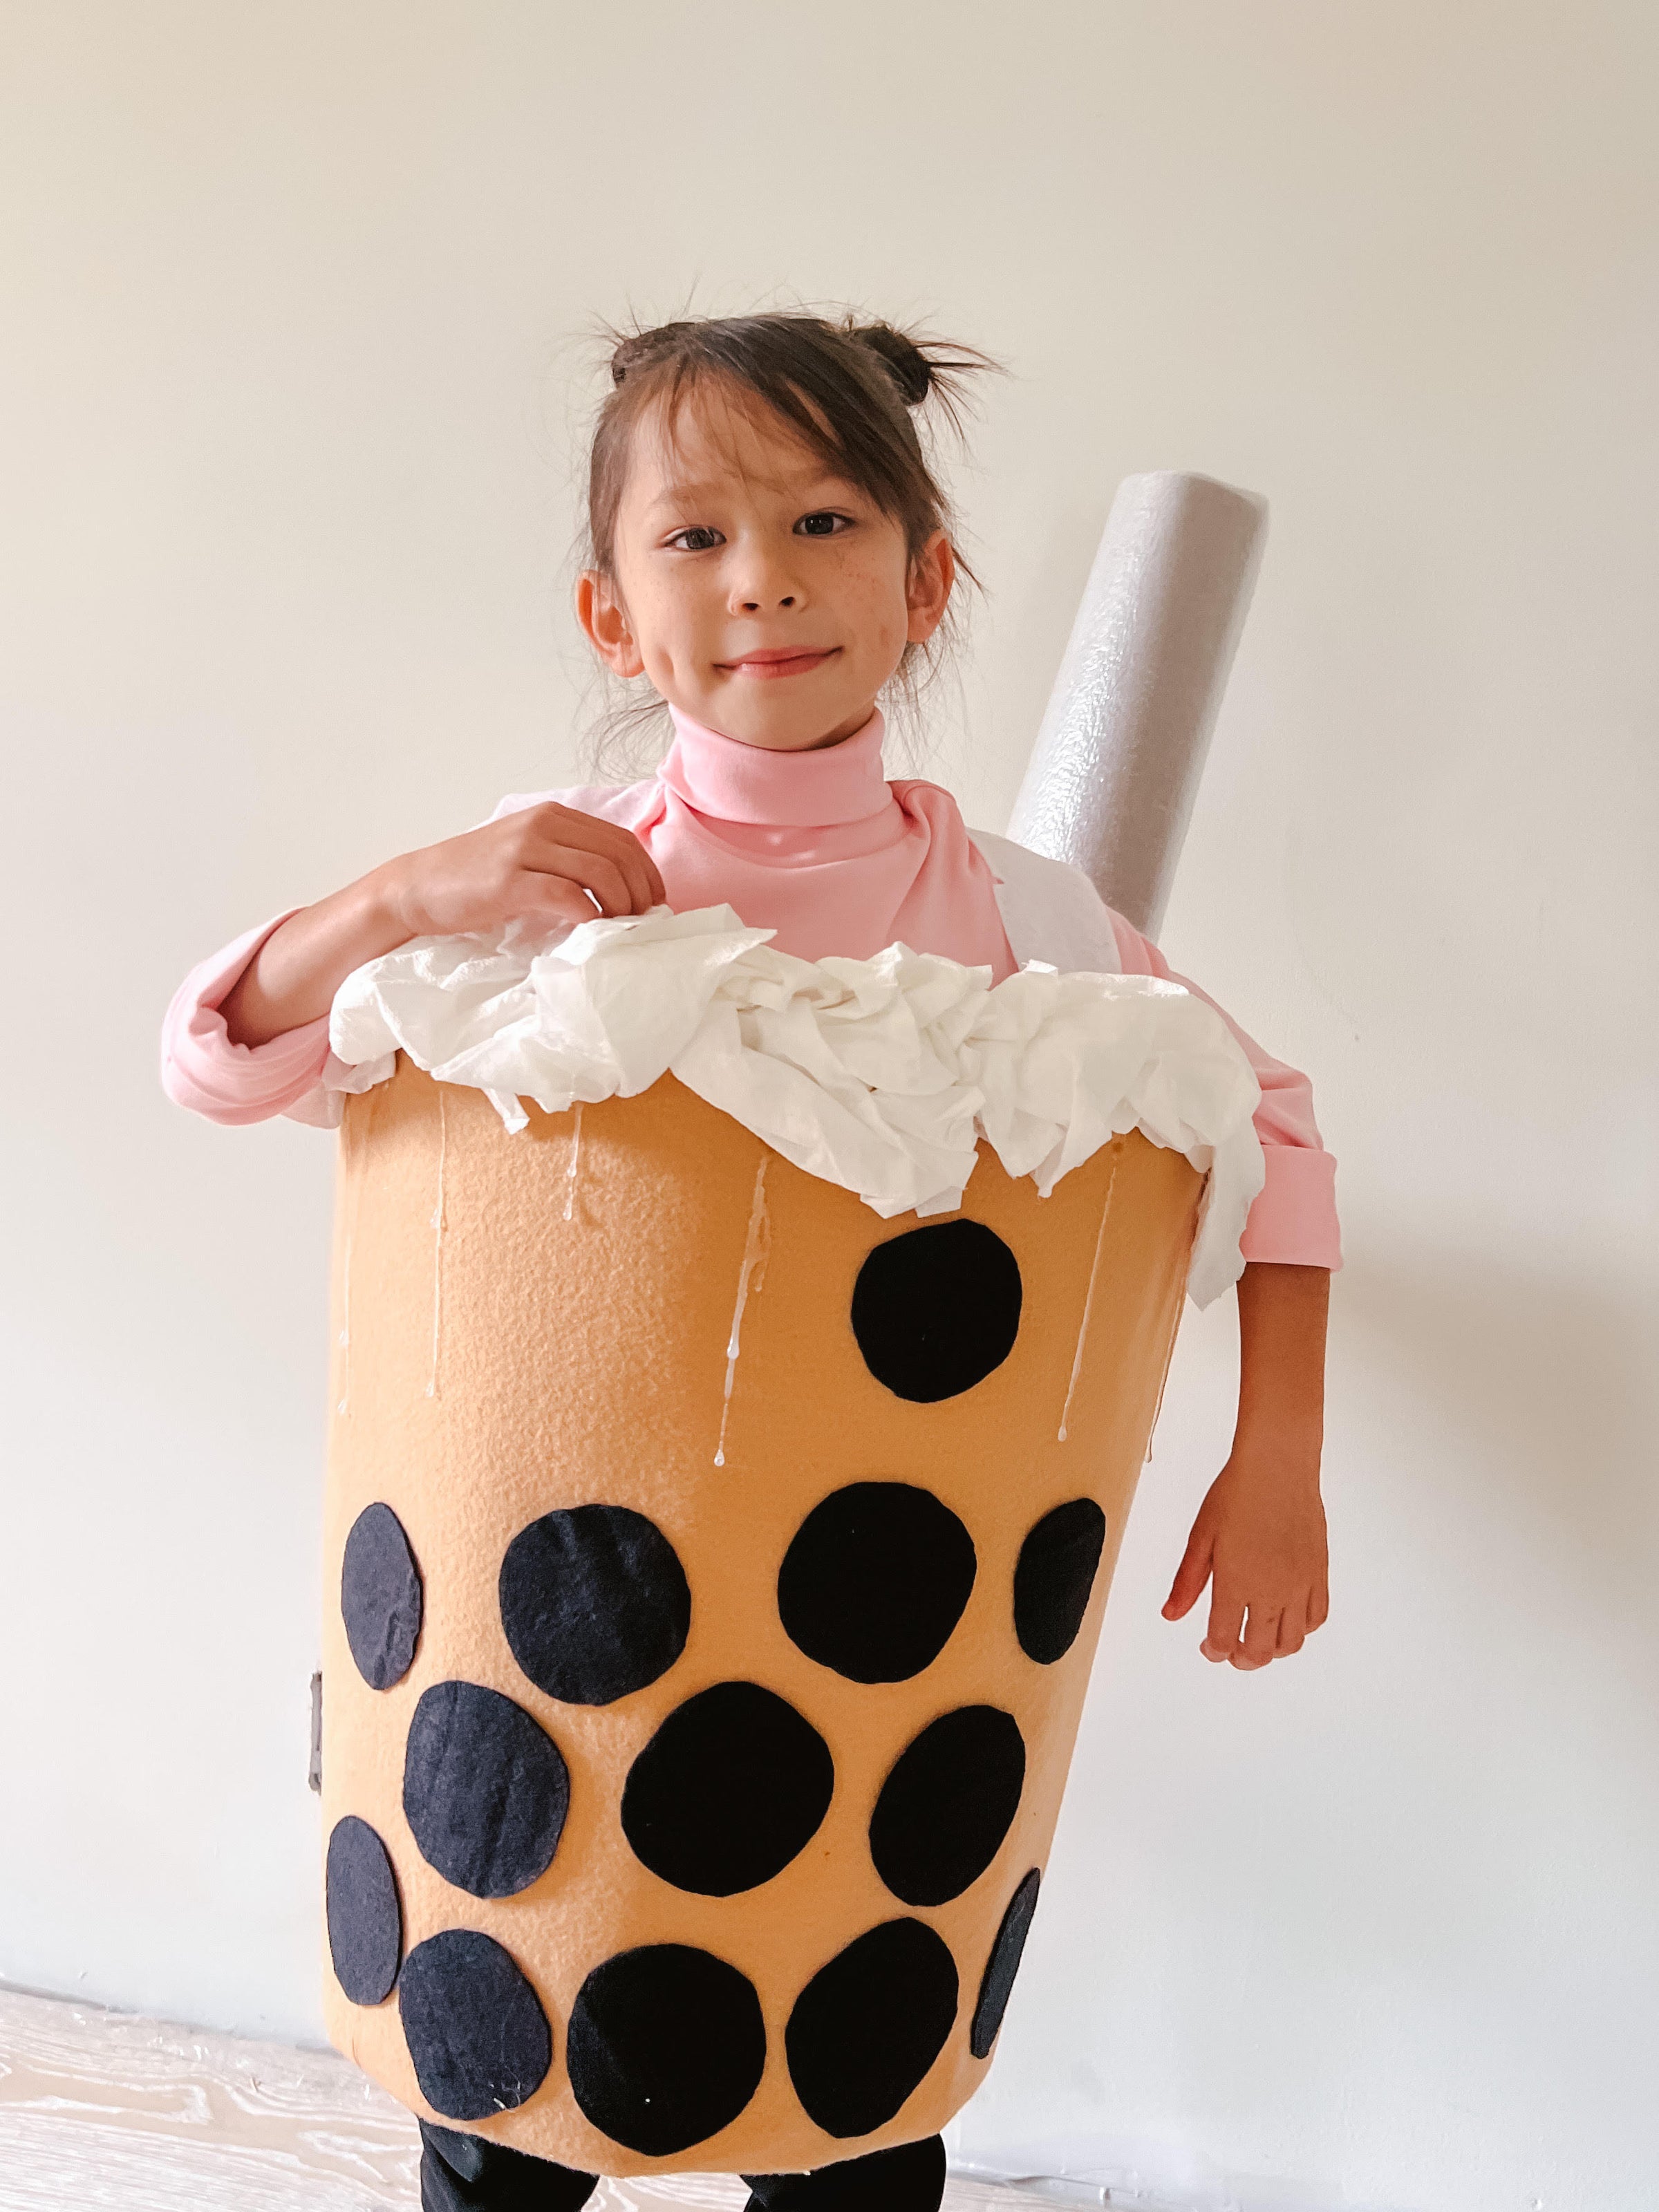 Boba Tea: A child wearig a pink top and black bottom, with DIY boba tea coveralls